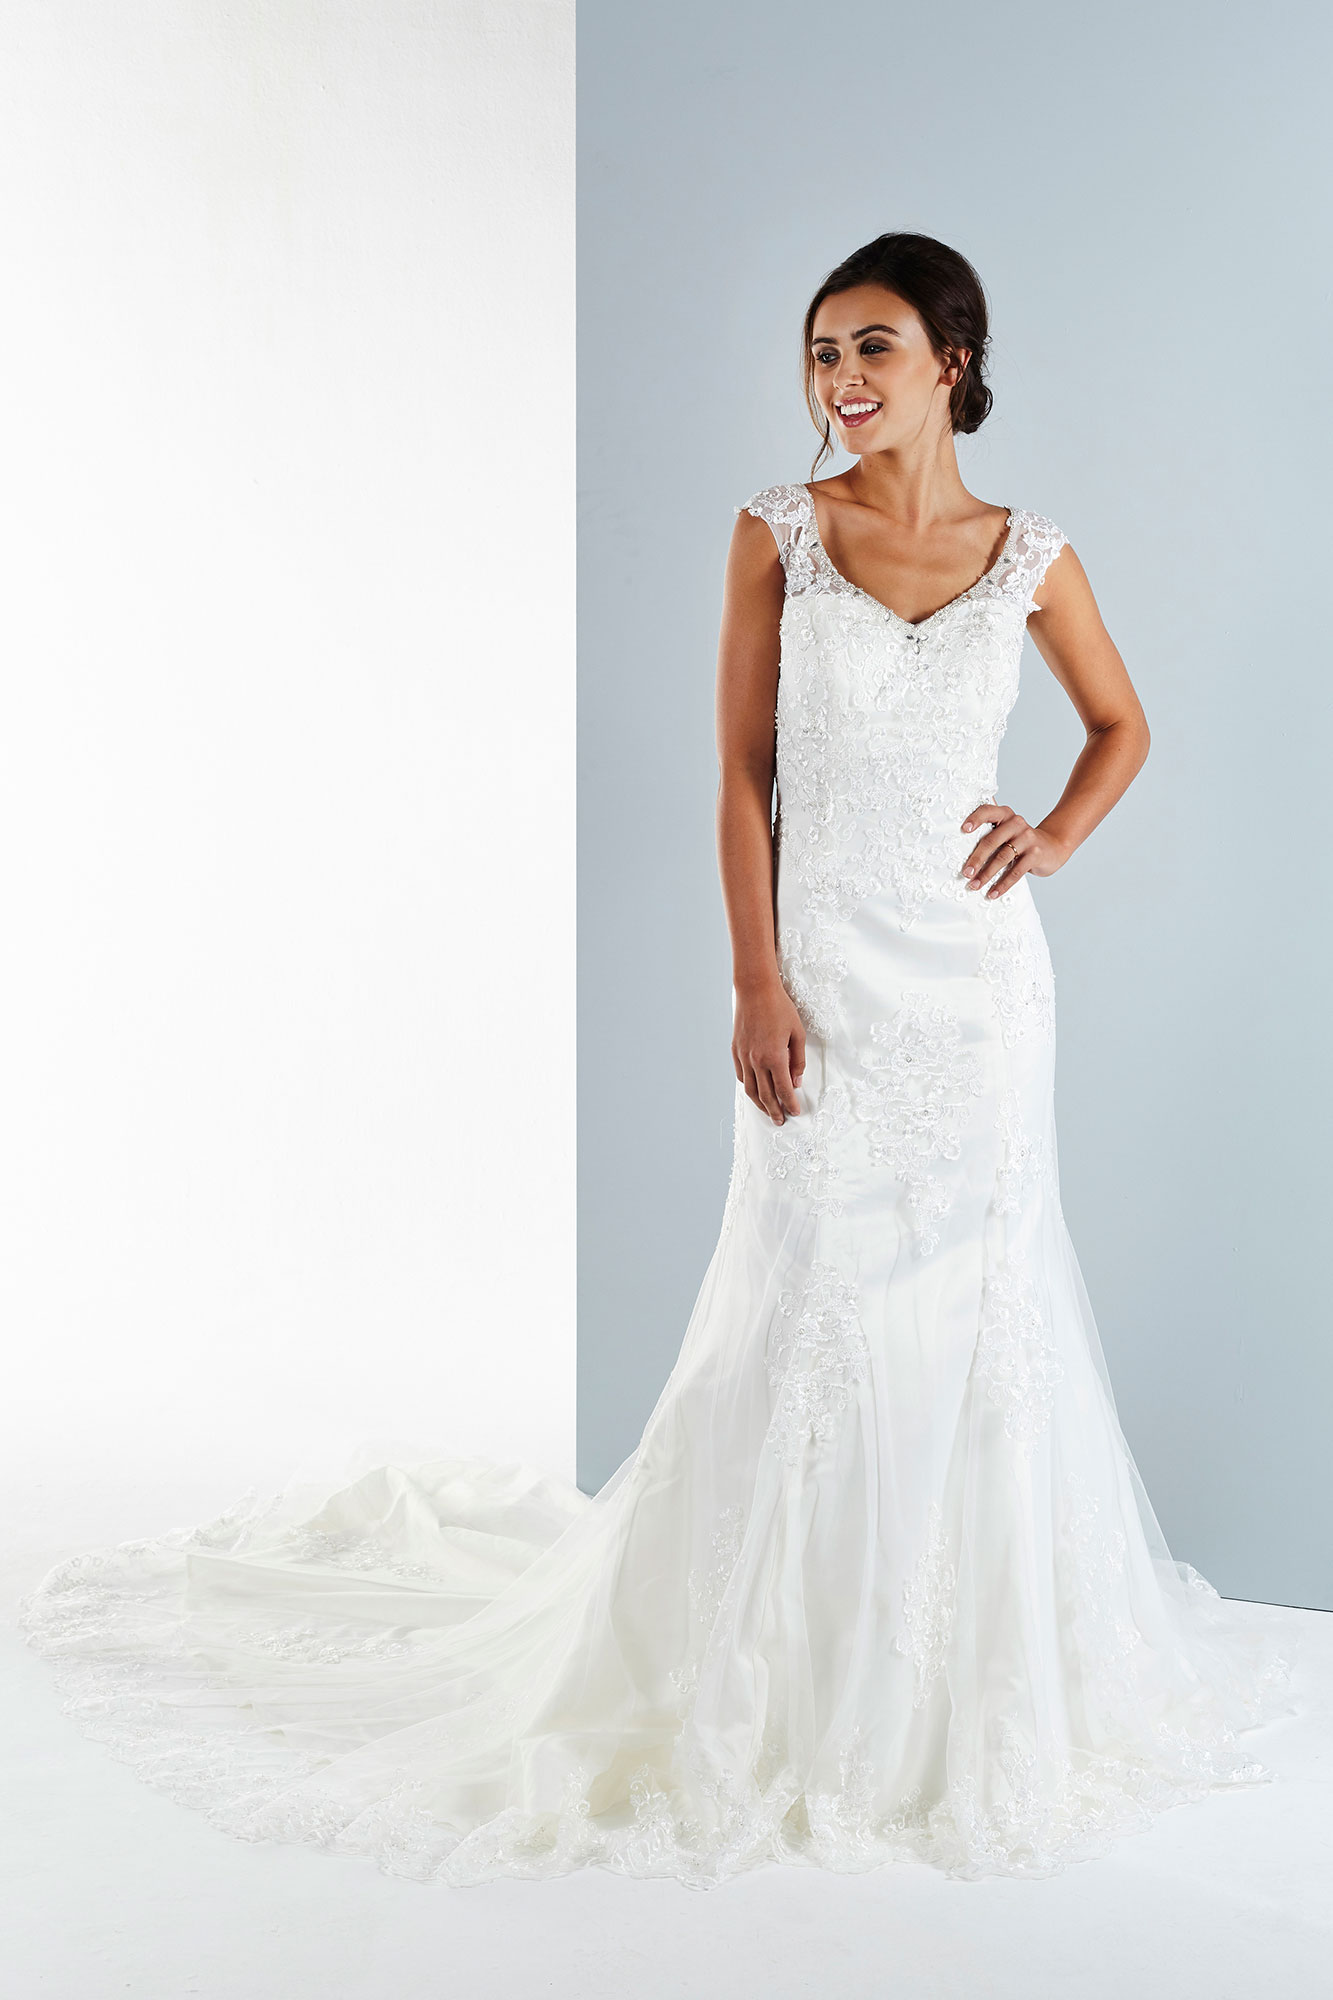 Pippa - A stunning lace wedding gown | WED4LESS OUTLETS ~ Wedding Dress ...